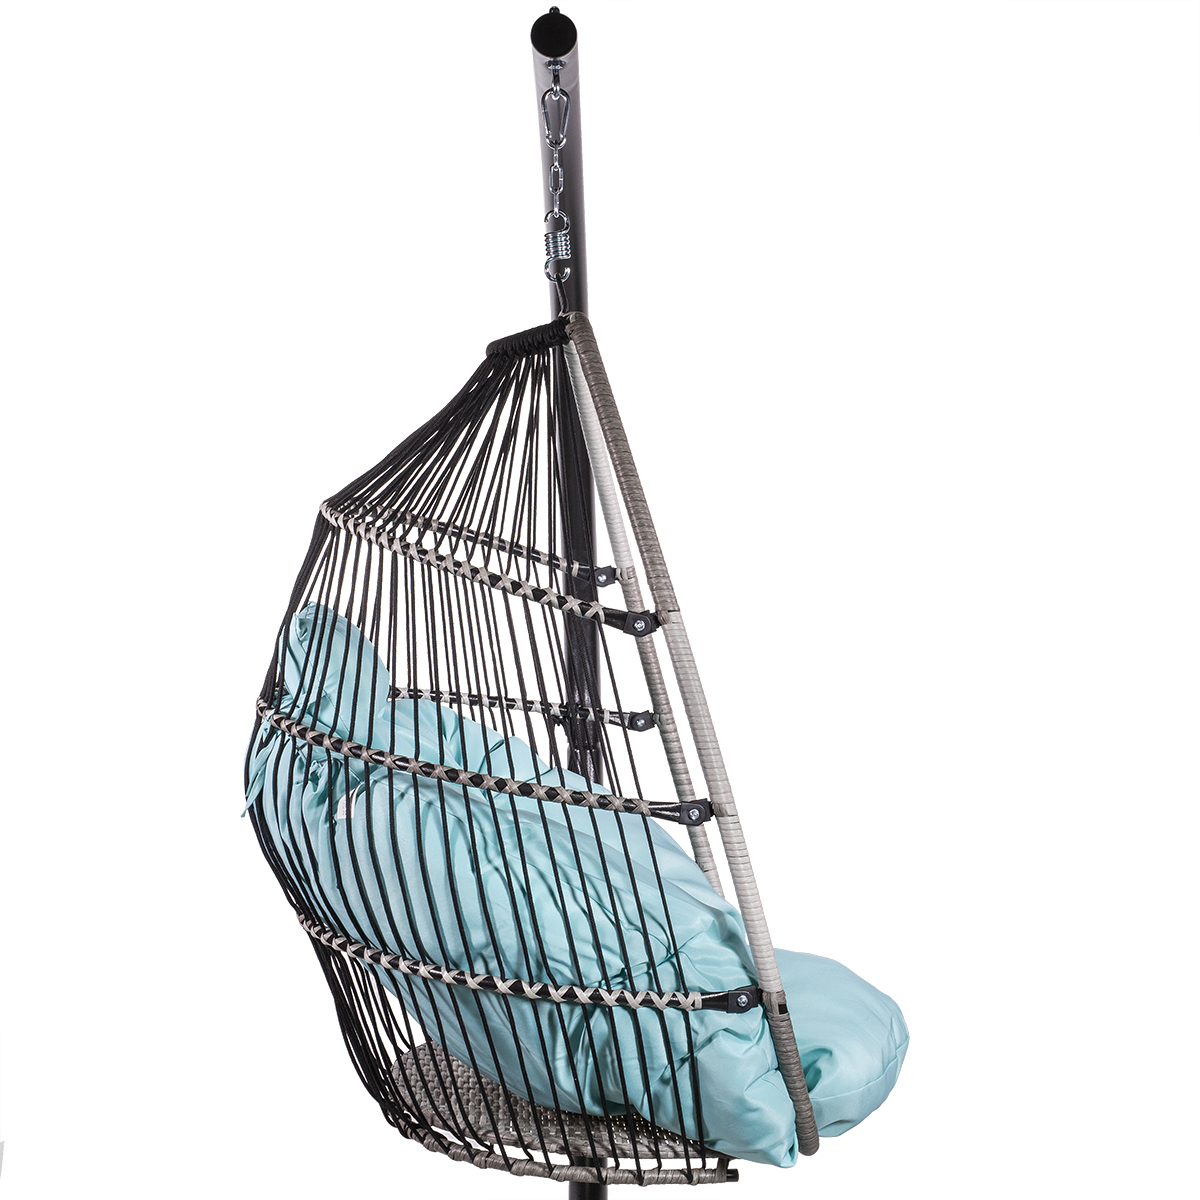 Outdoor Patio Egg Chair Hanging Lounge Chair Swing Chair Basket Style Chair Nest with Cushion and Stand - image 3 of 6